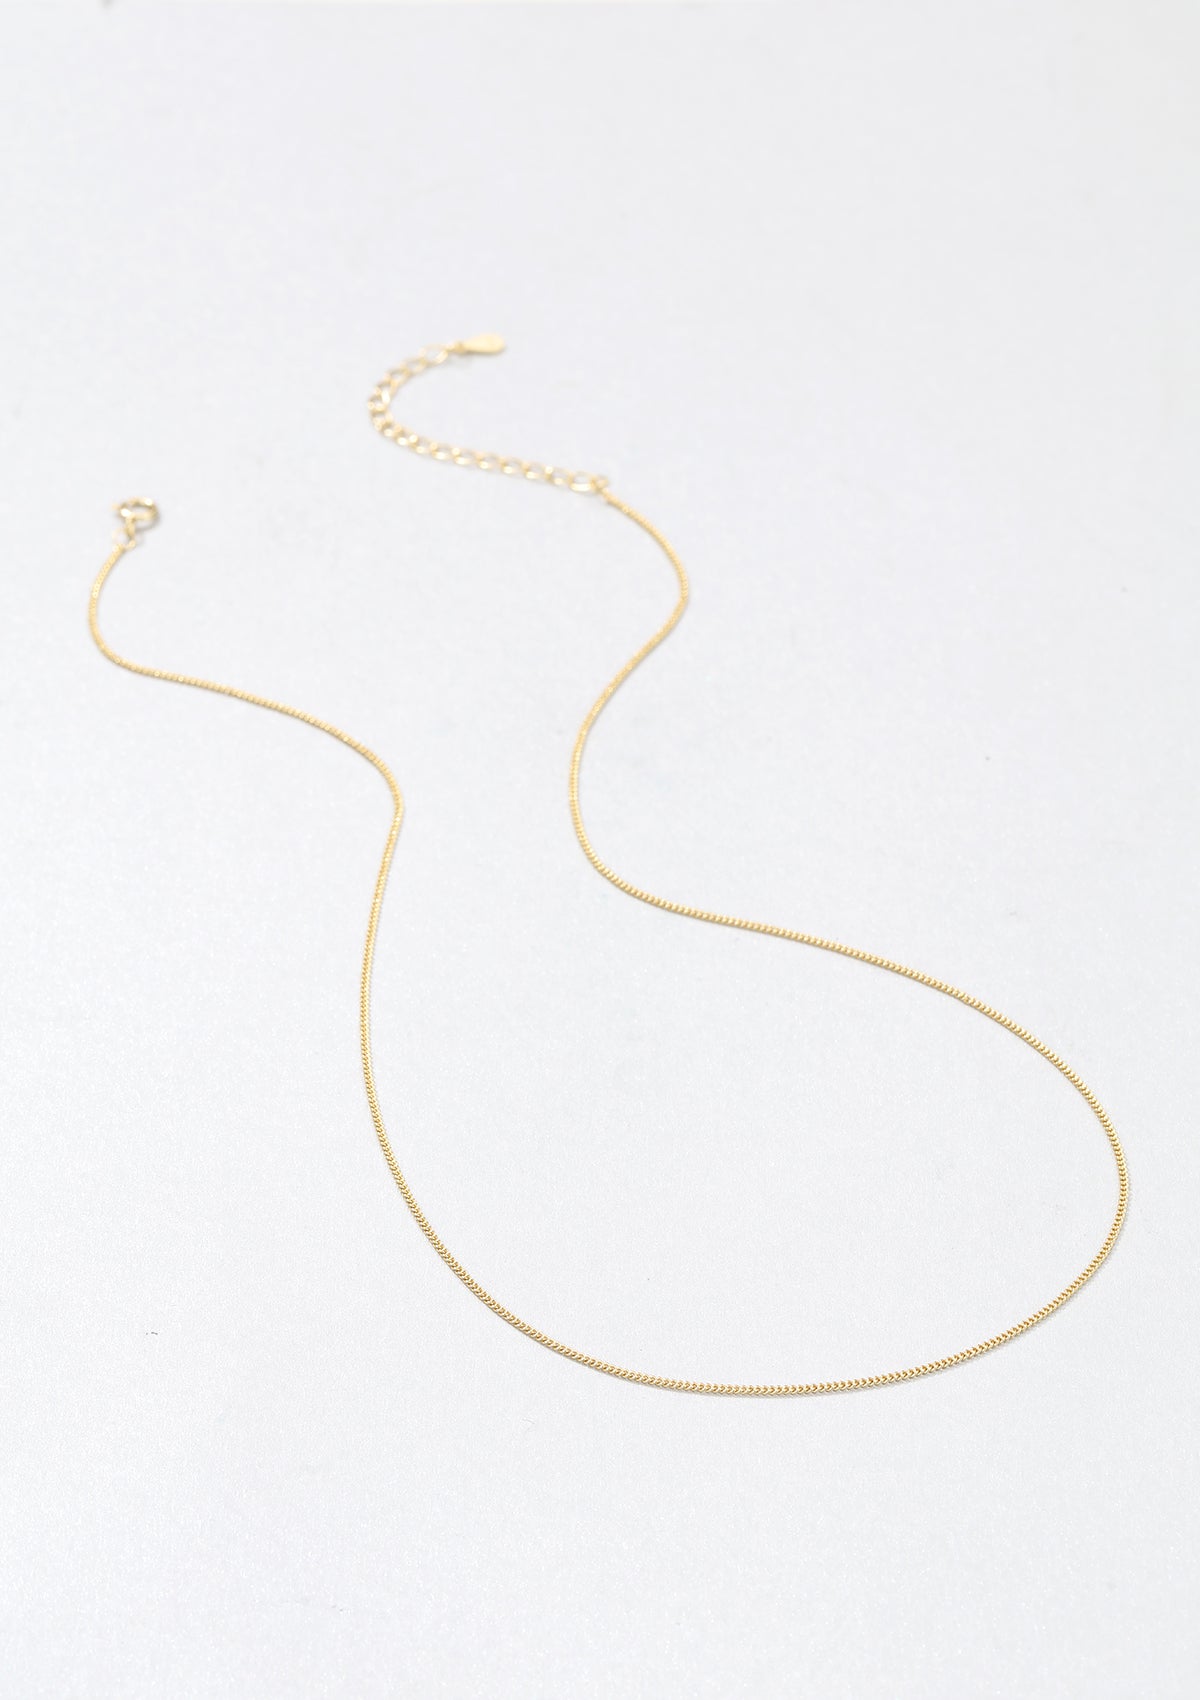 Fine Textured Chain Necklace Sterling Silver Gold